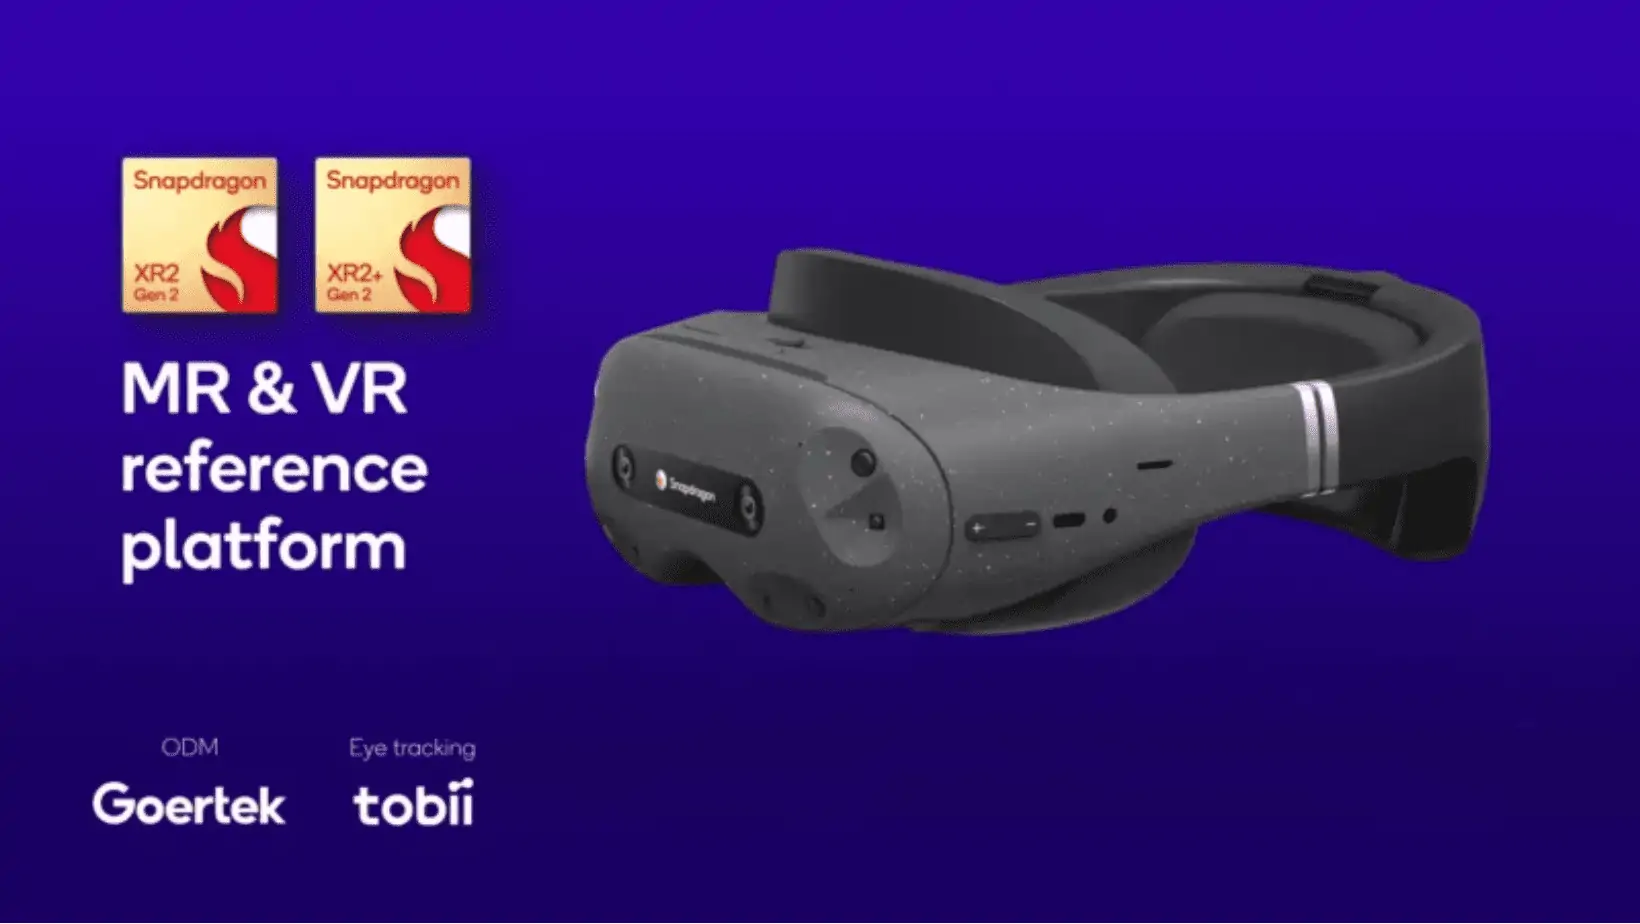 Qualcomm’s XR2+ Gen 2 Unleashes AR/VR Revolution with 4.3K Clarity, Powerful Performance, and Major Industry Partnerships